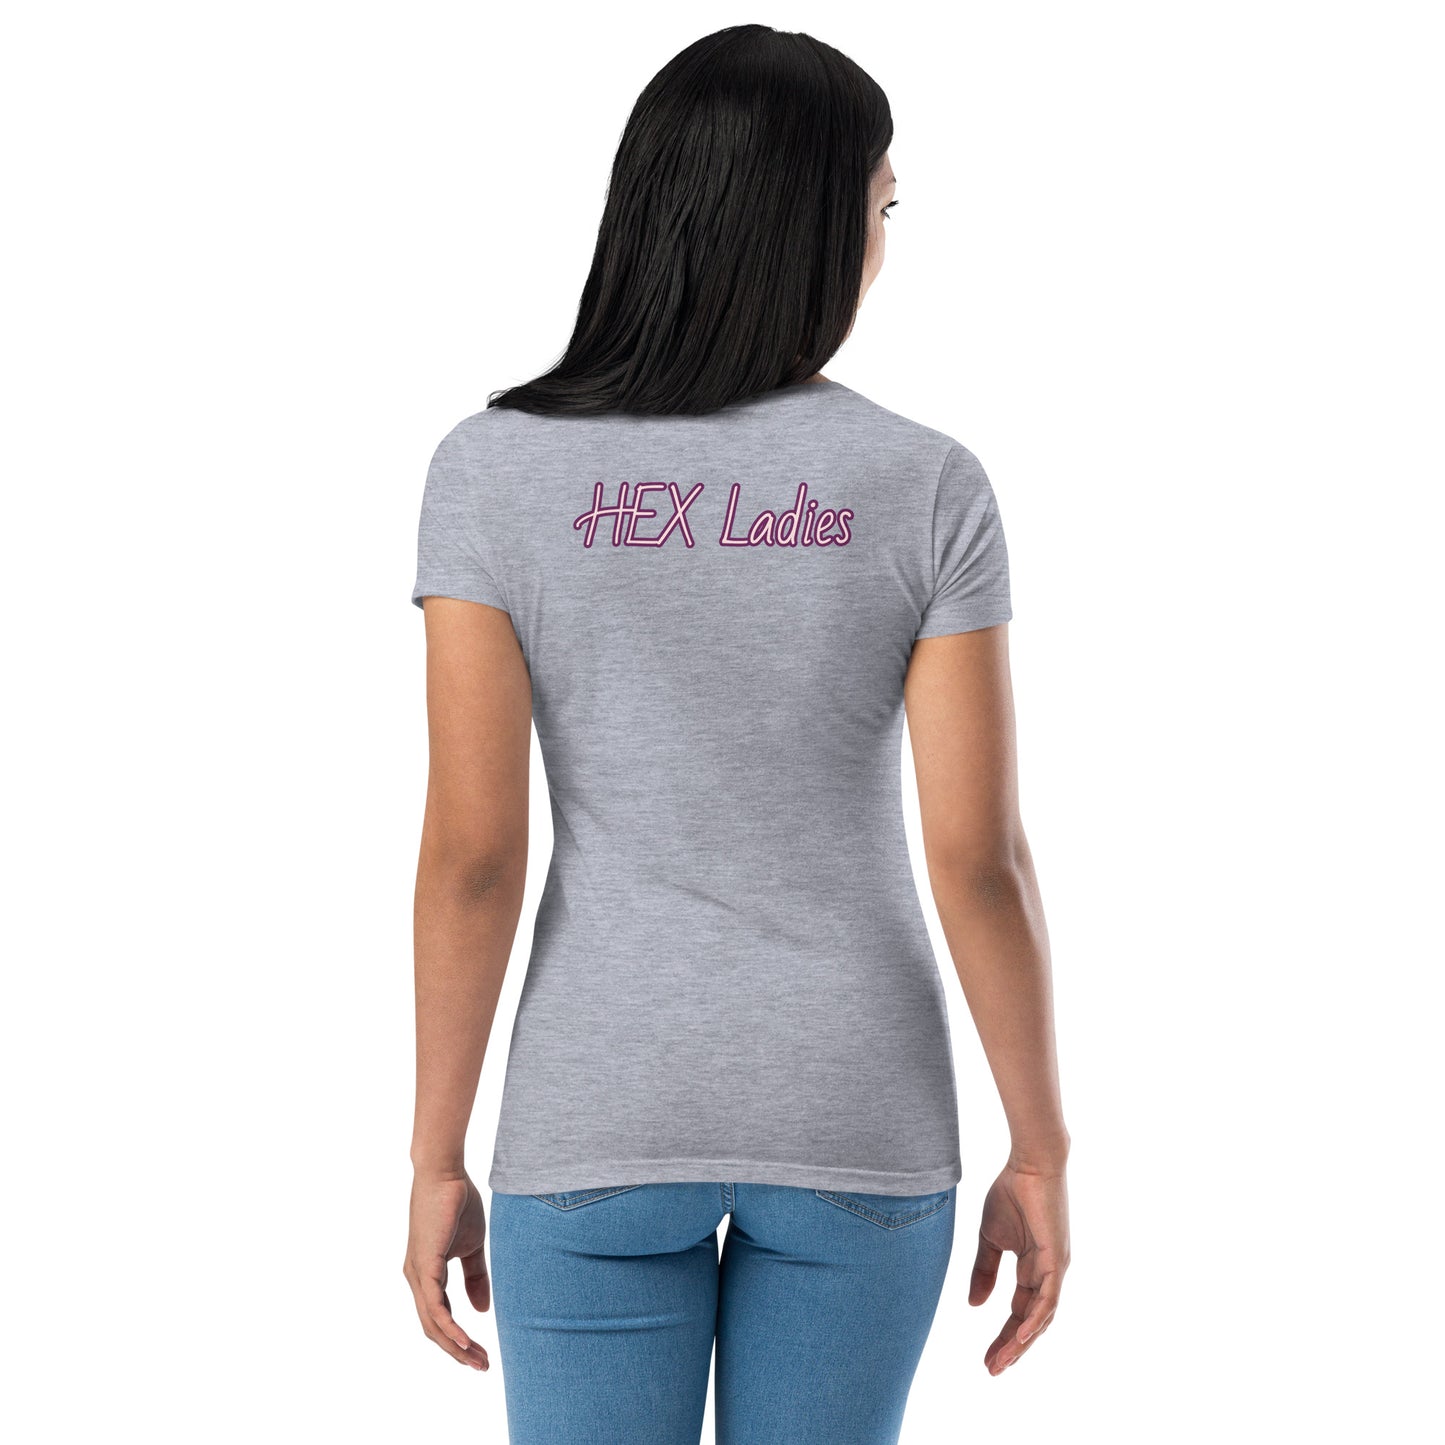 Ladies of HEX Women’s Fitted T-shirt